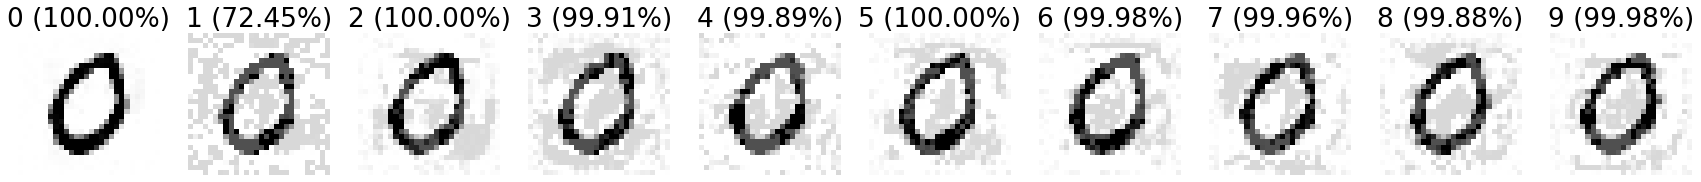 10 images, each resembling the same digit 0 formed from black and dark gray pixels, with some gray pixels in the background, and labeled: 0 (100.00%); 1 (72.45%); 2 (100.00%); 3 (99.91%); 4 (99.89%); 5 (100.00%); 6 (99.98%); 7 (99.96%); 8 (99.88%); 9 (99.98%).